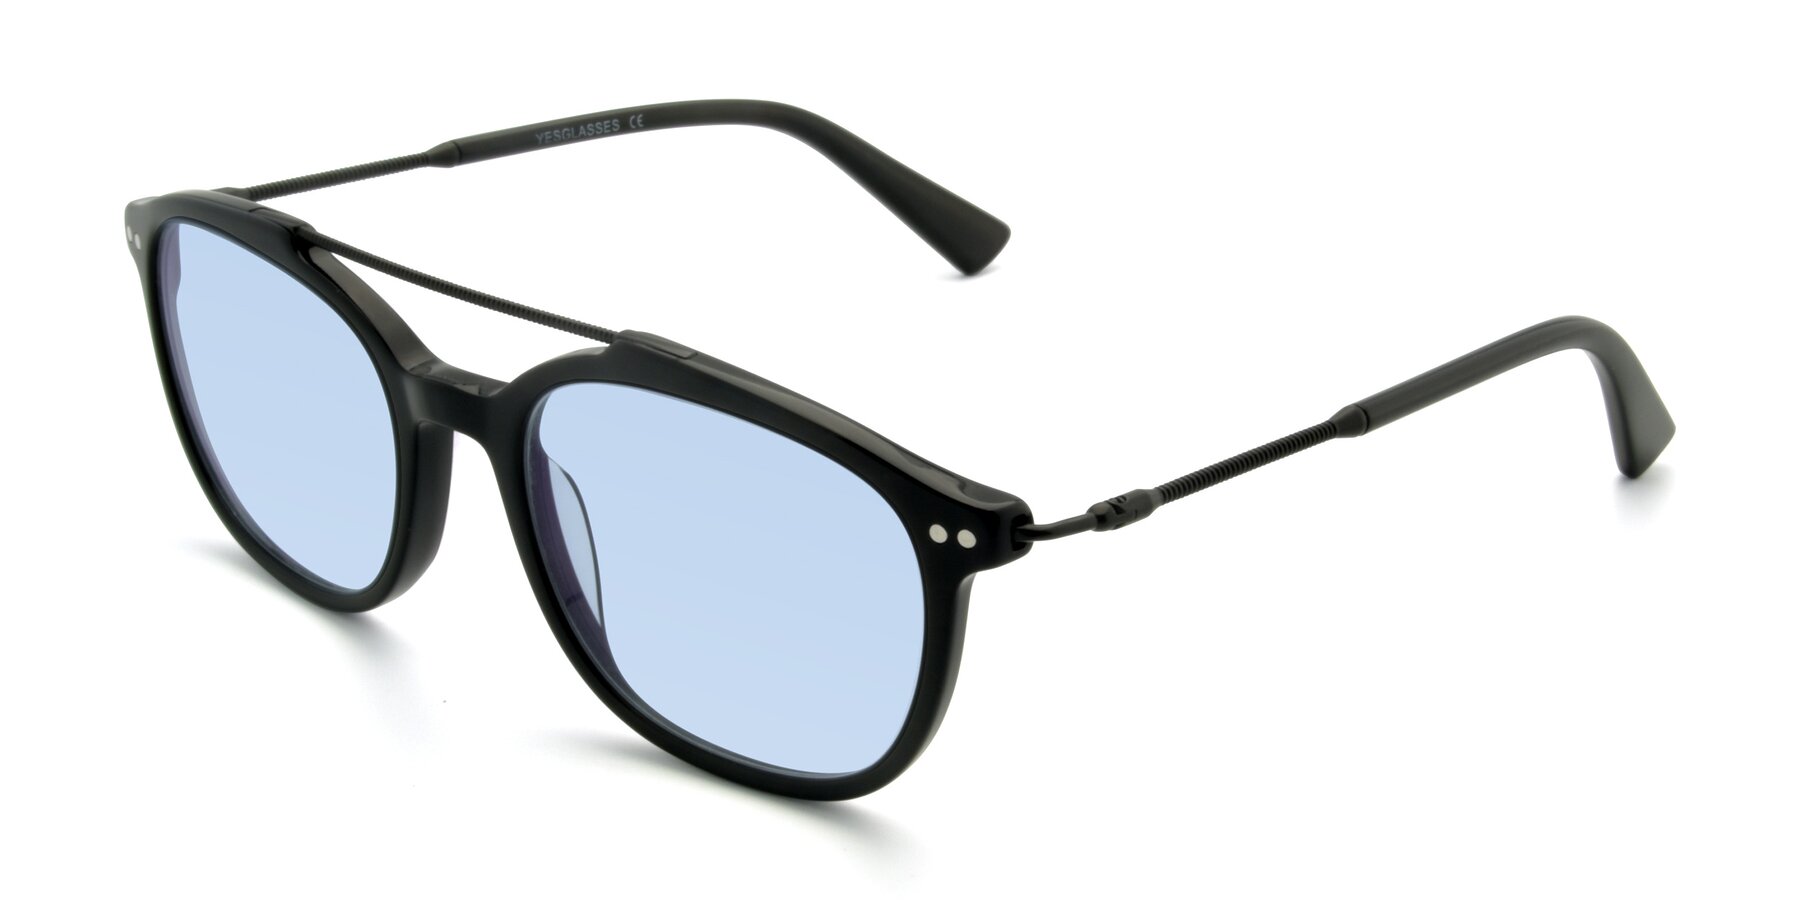 Angle of 17150 in Black with Light Blue Tinted Lenses